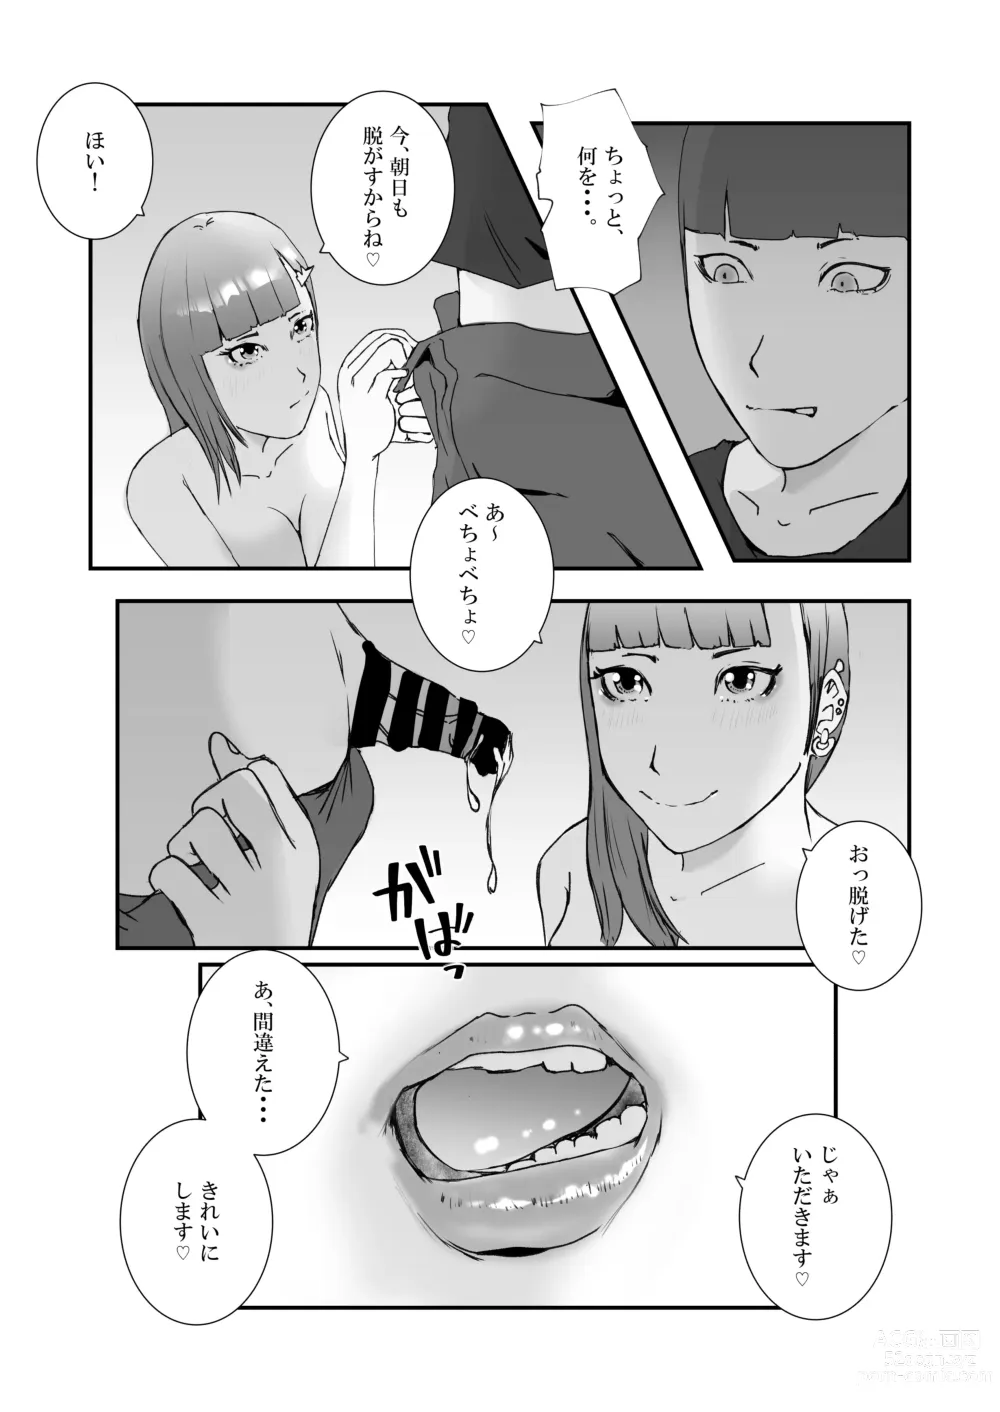 Page 18 of doujinshi Serious sex with a popular idol in the toilet during a class reunion. From cleaning blowjob to creampie..